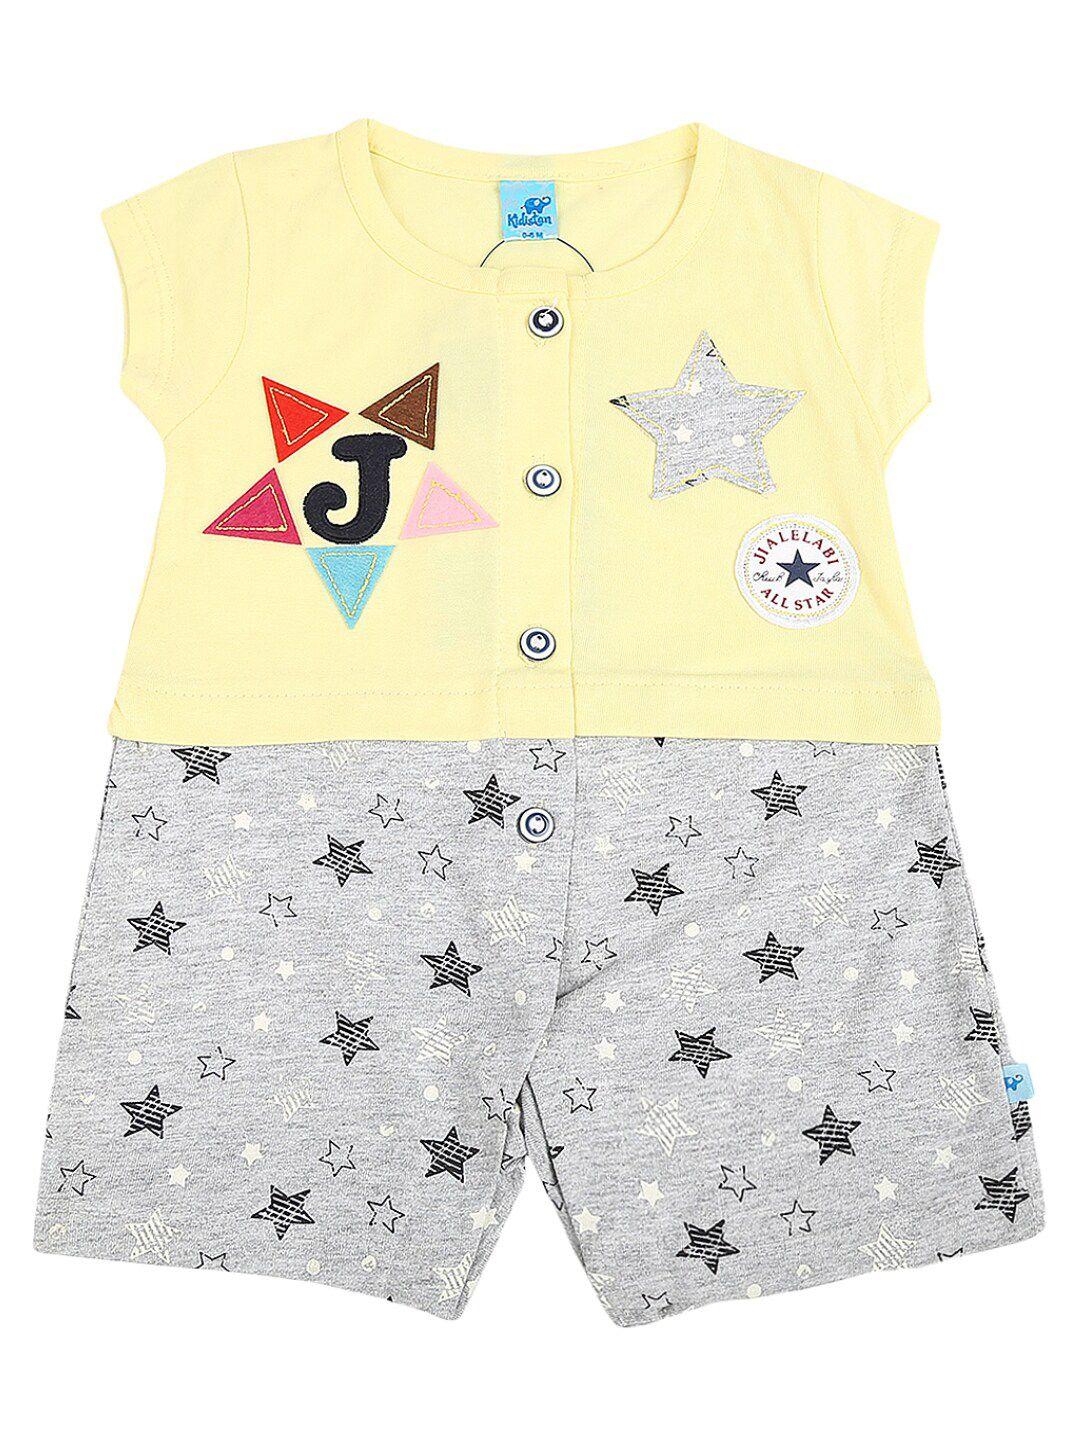 v-mart infants yellow & grey printed pure cotton romper